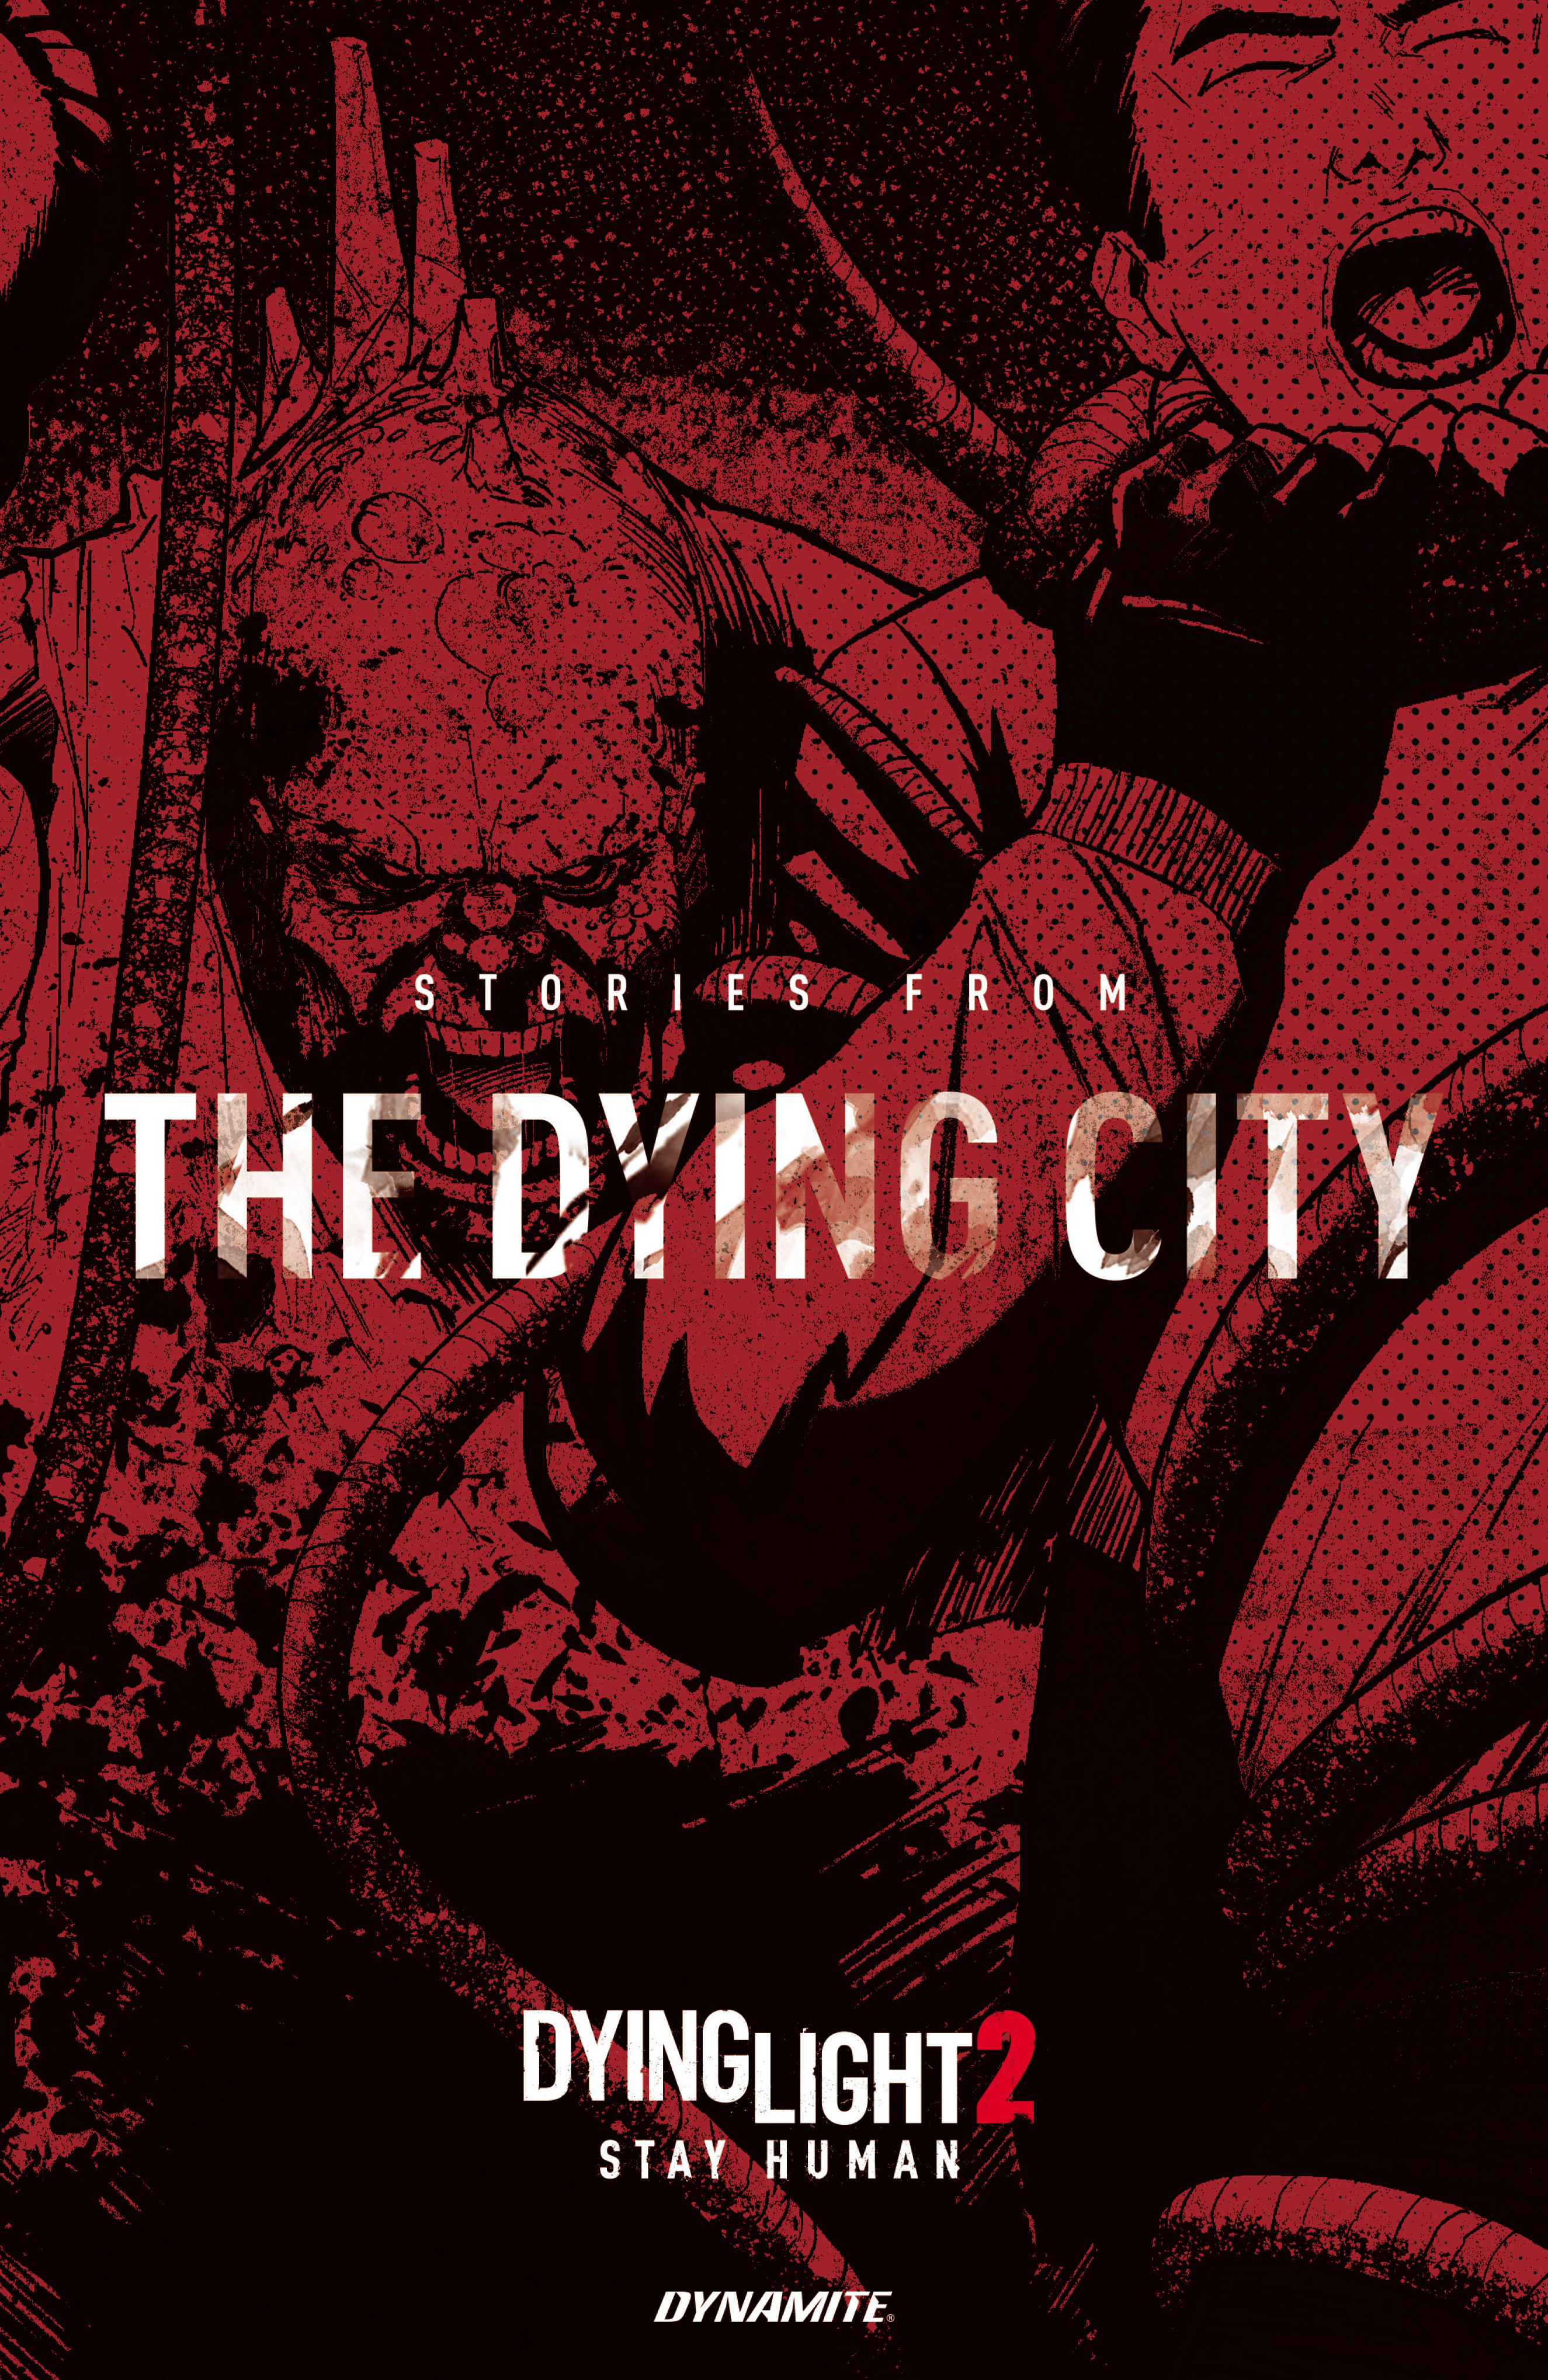 Read online Dying Light: Stories From the Dying City comic -  Issue # TPB (Part 1) - 2